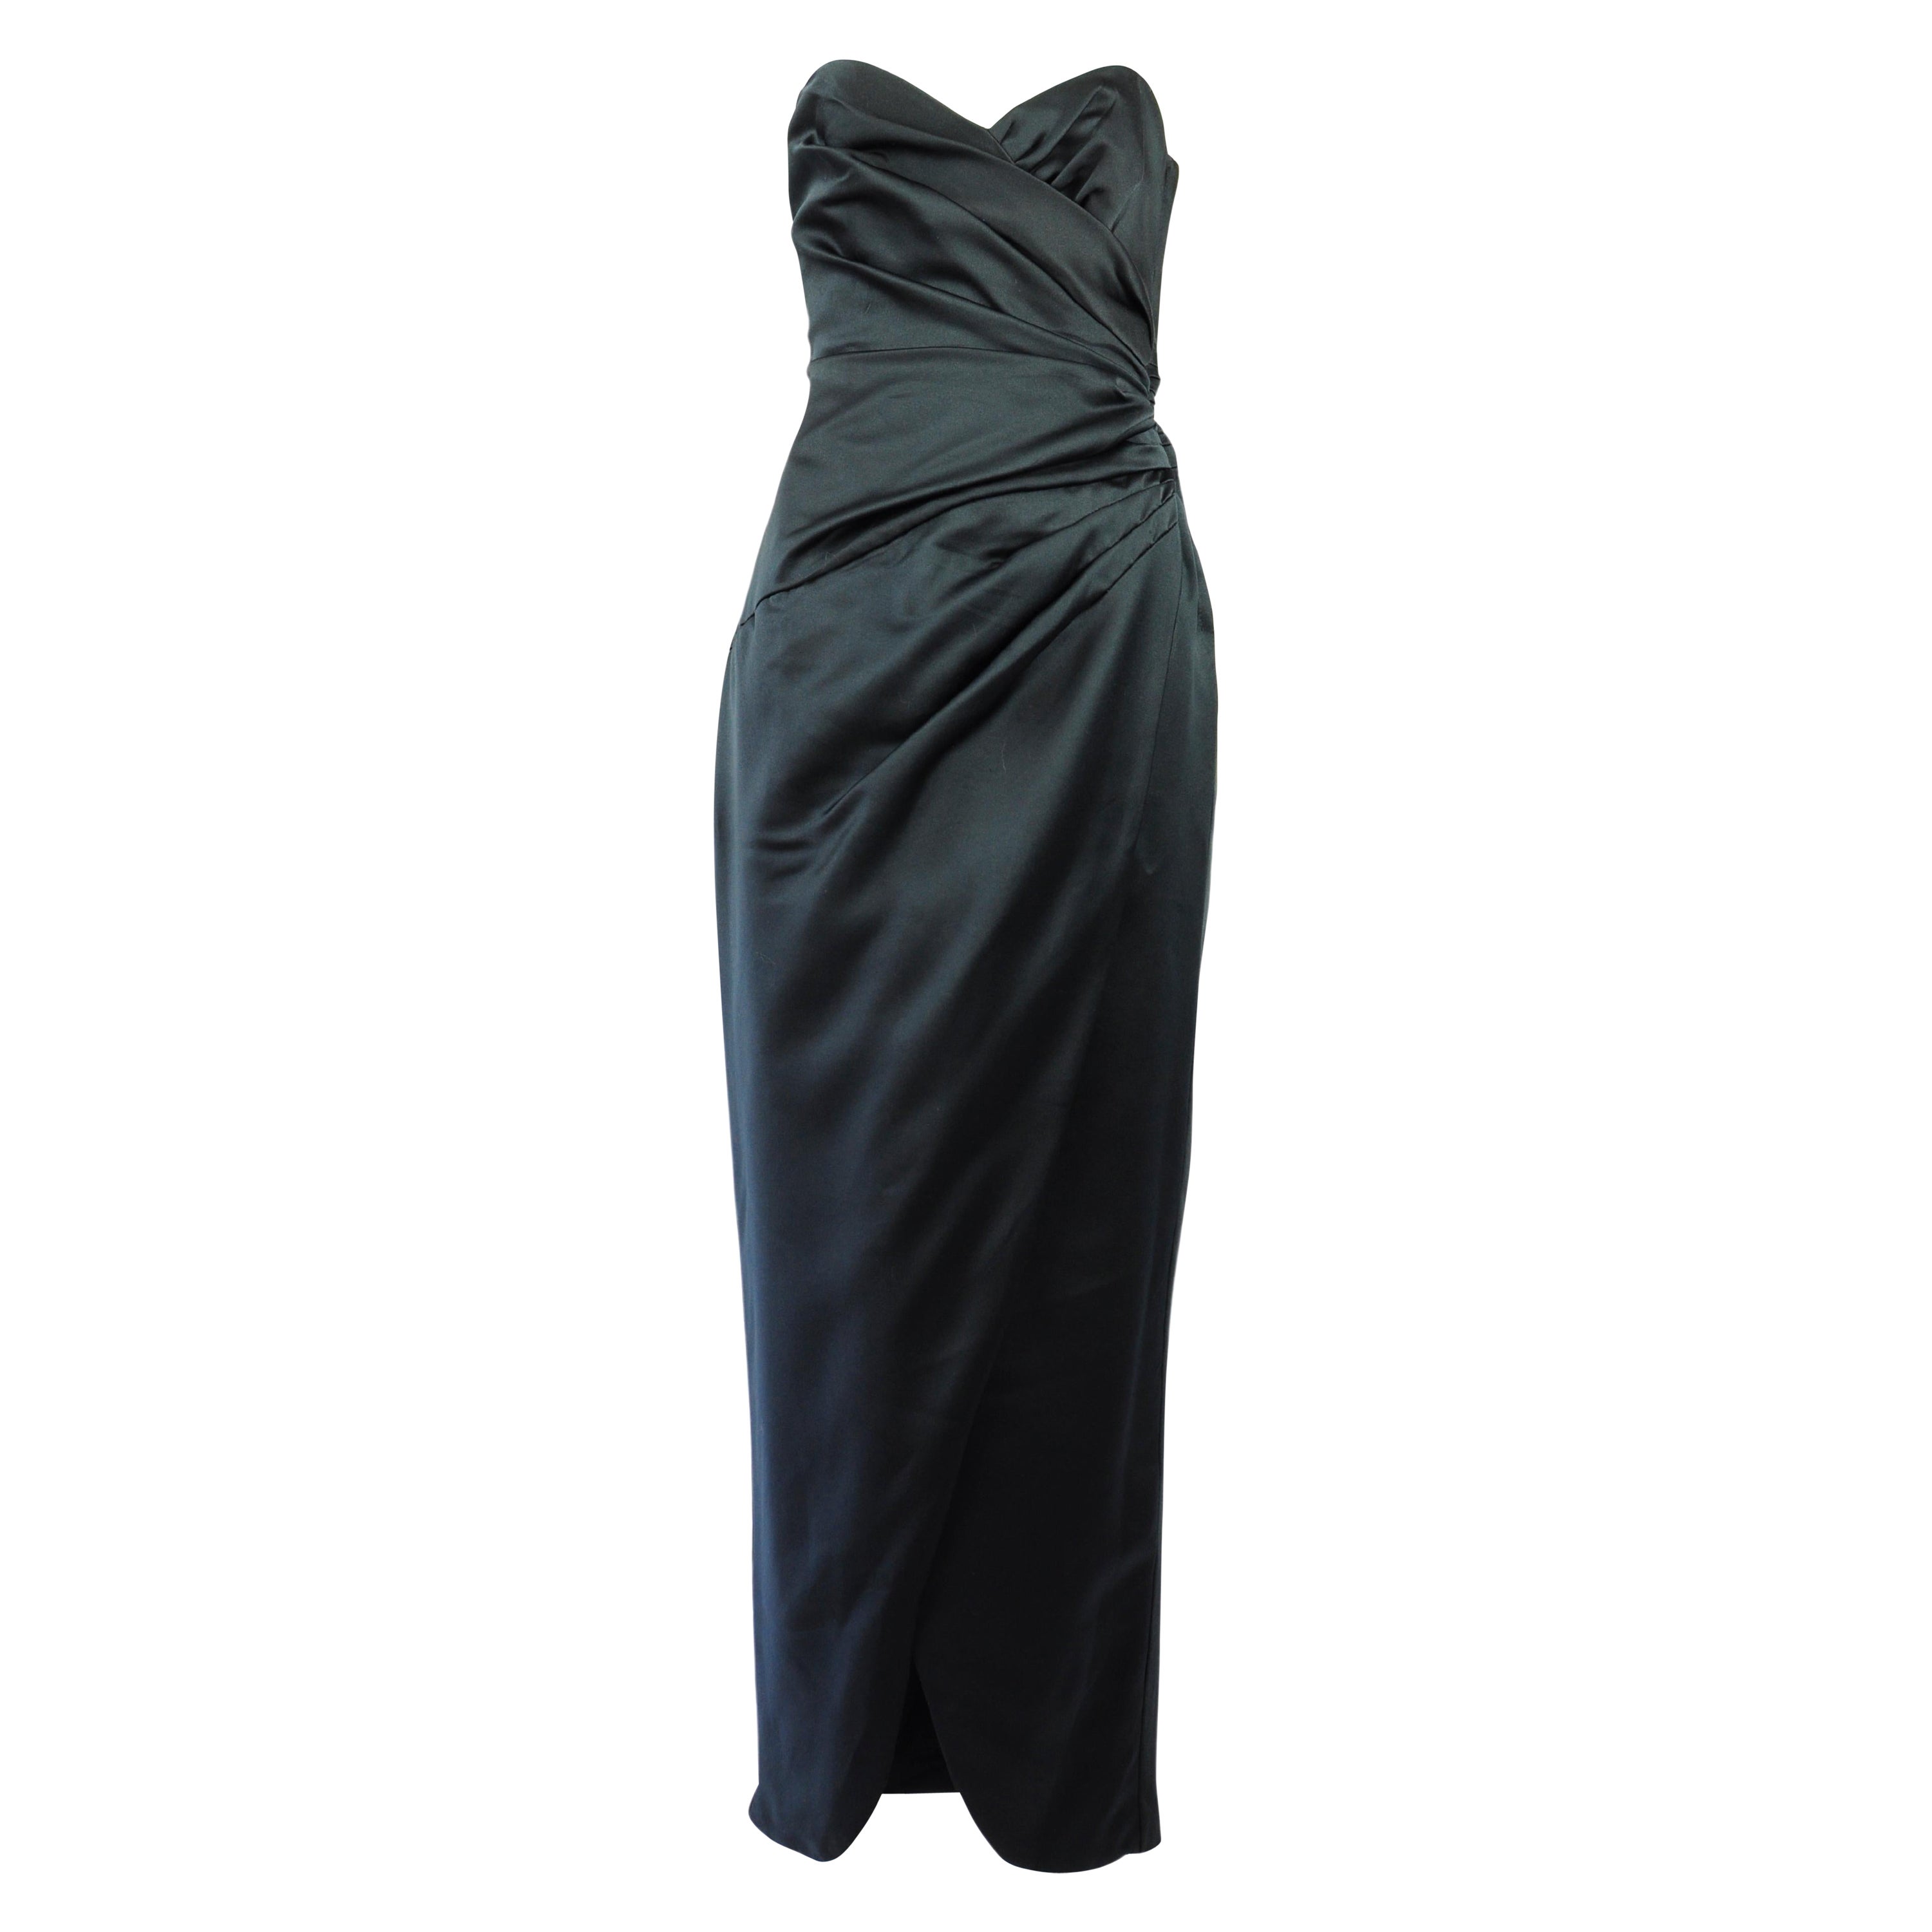 Victor Costa Black Dress Strapless Structured Draped Satin 1980s For Sale